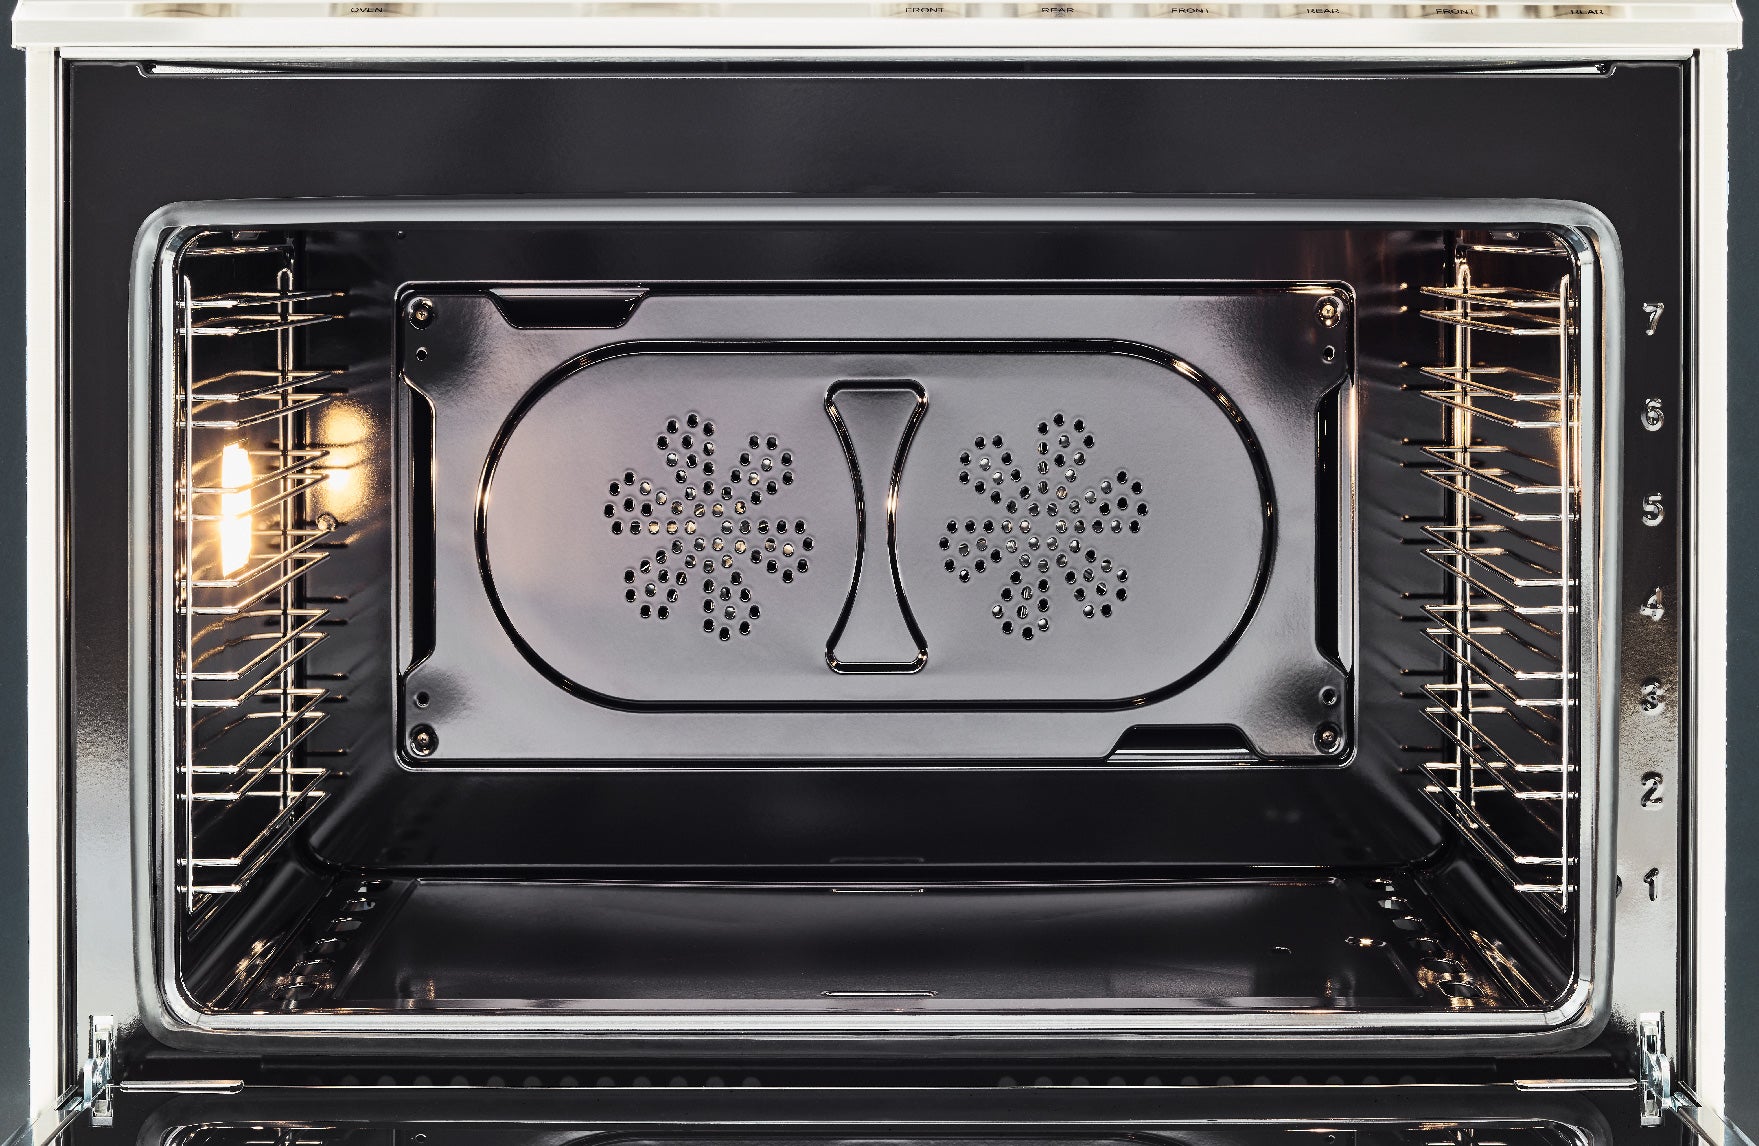 Bertazzoni - 36 inch Induction Range, 5 Heating Zones and Cast Iron Griddle, Electric Self-Clean Oven - MAS365ICFEPX